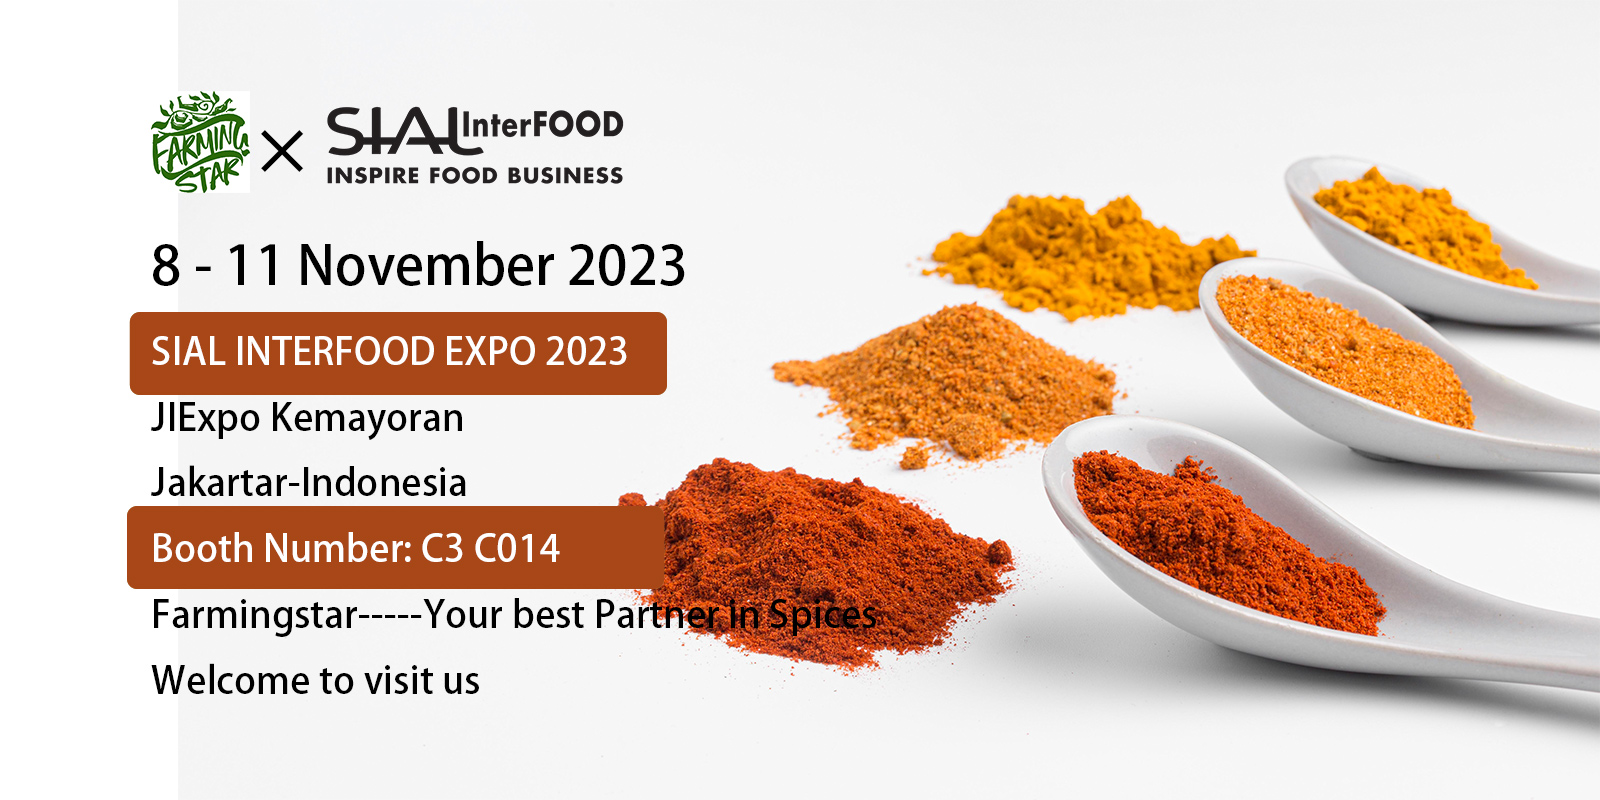 WE COME TO SIAL INTERFOOD EXPO 2023